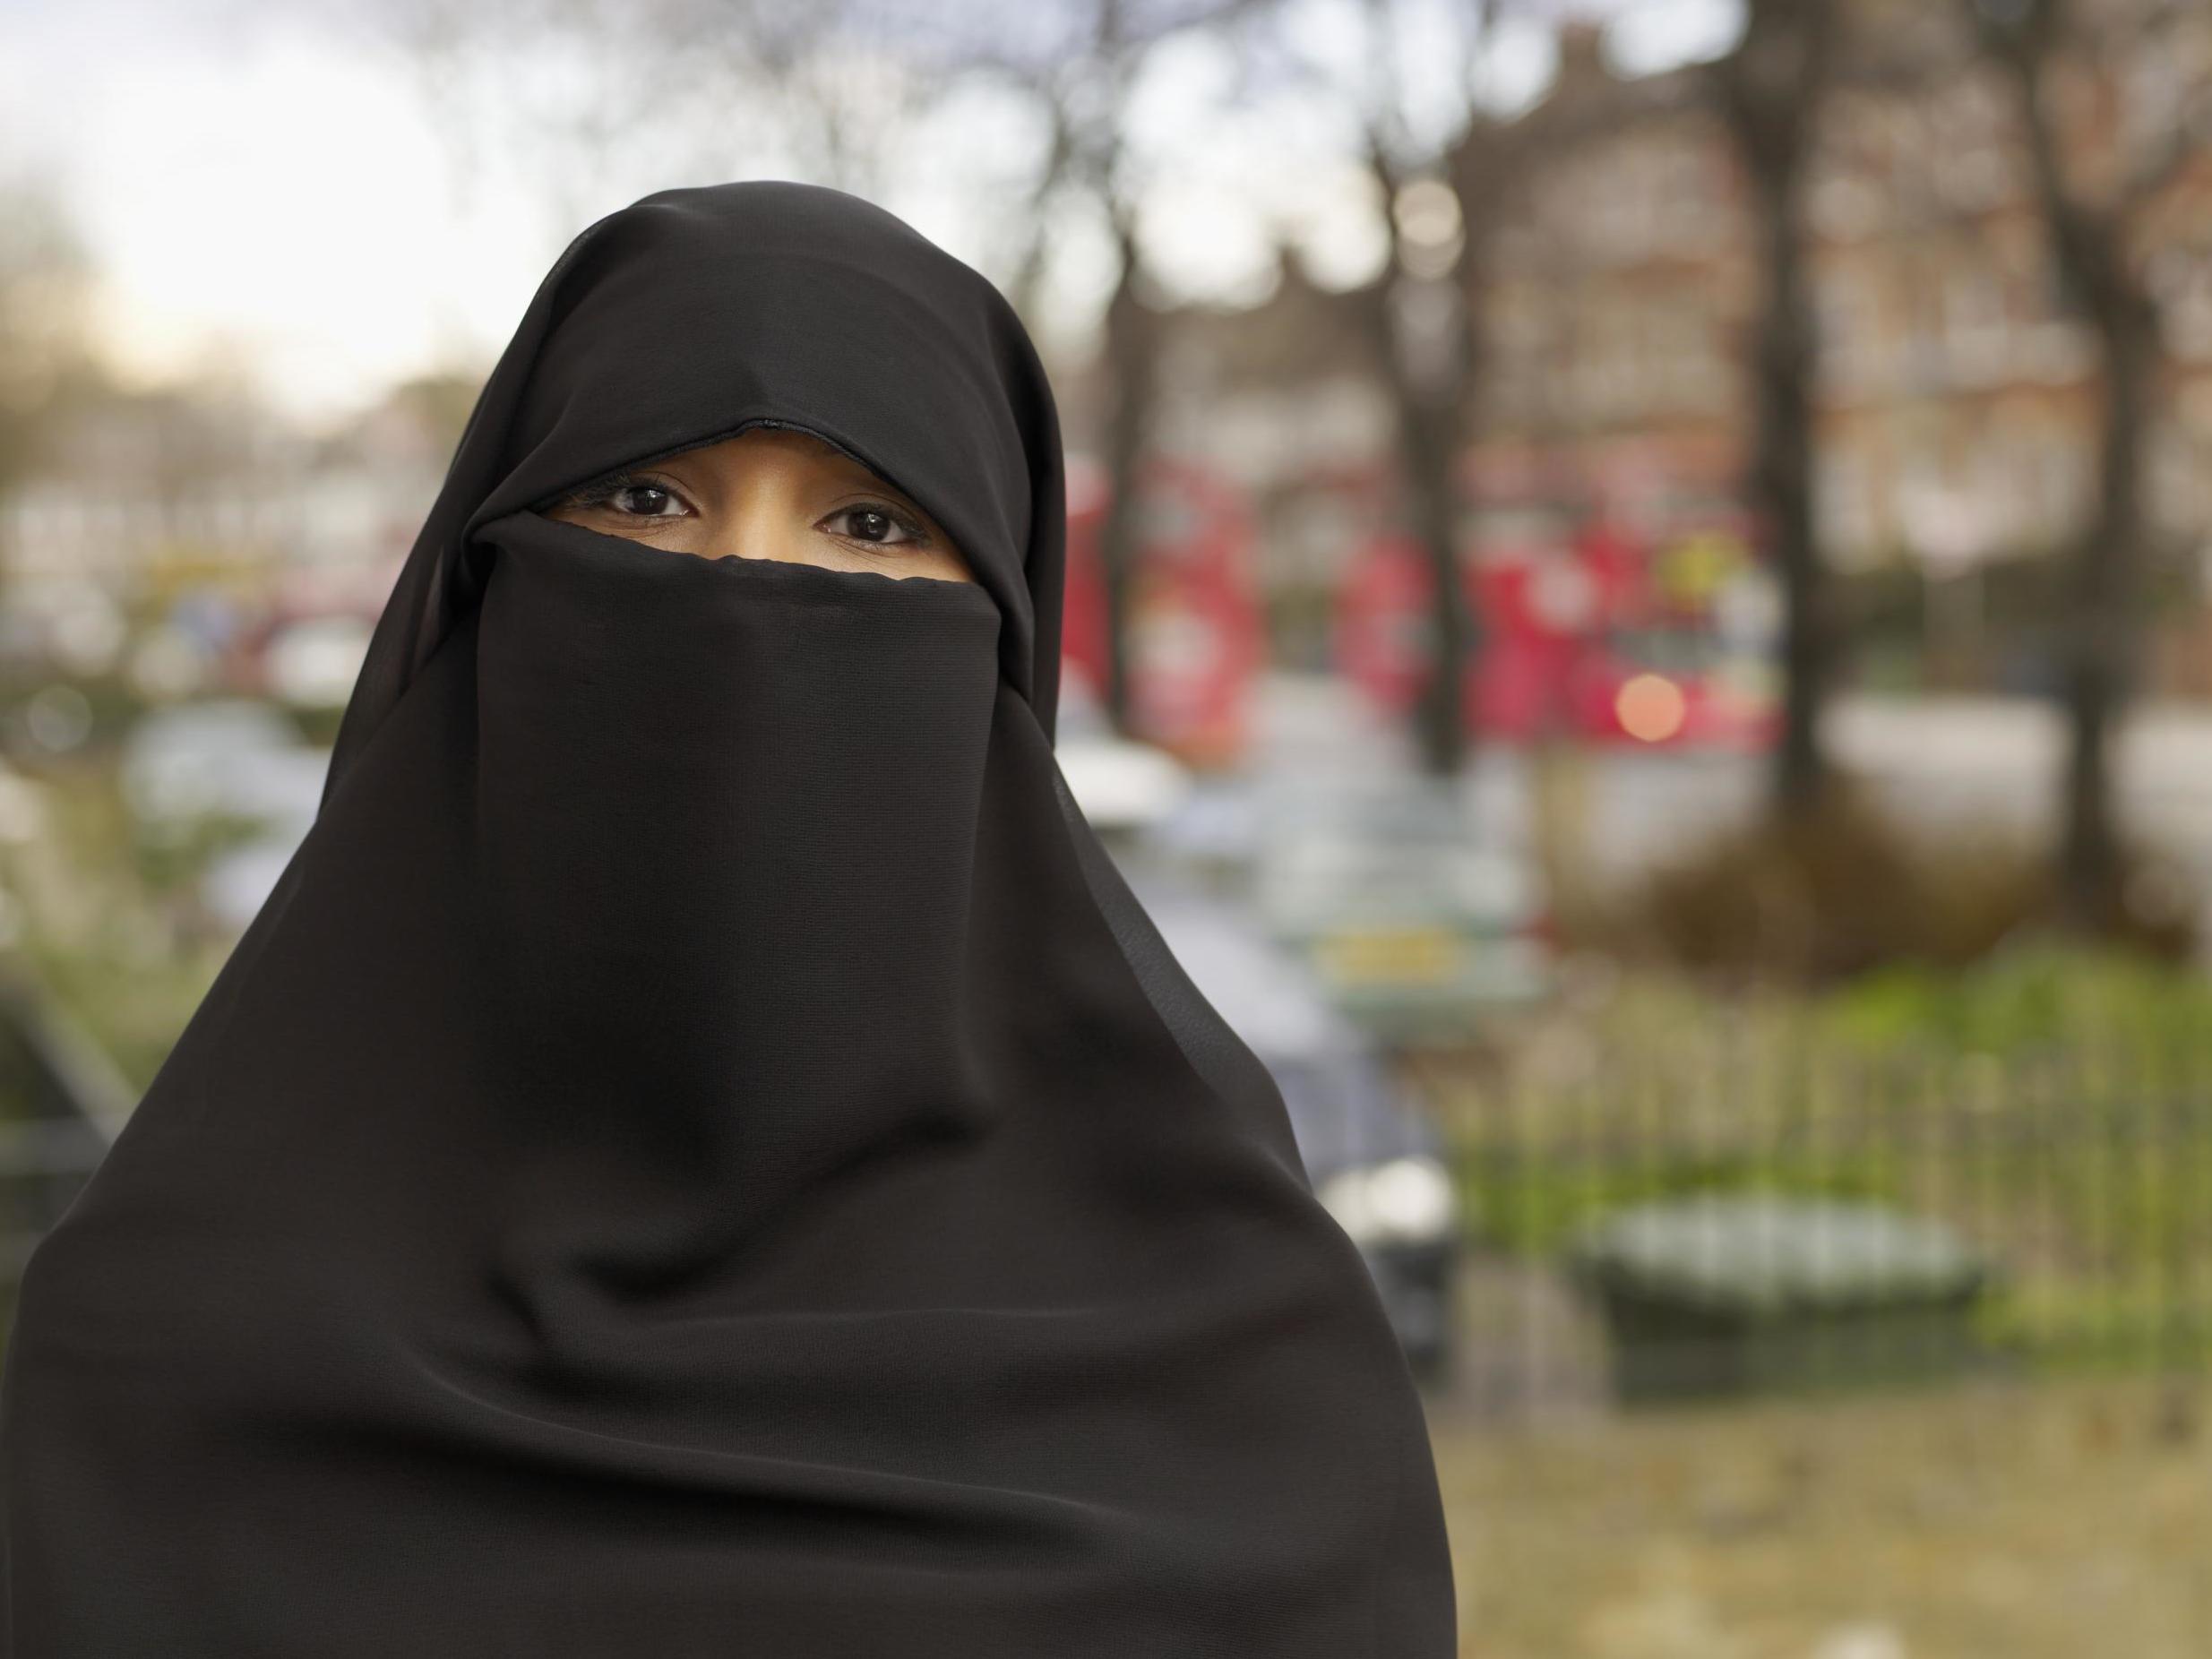 Veiled racism How the law change on Covid-19 face coverings makes Muslim women feel The Independent The Independent hq image